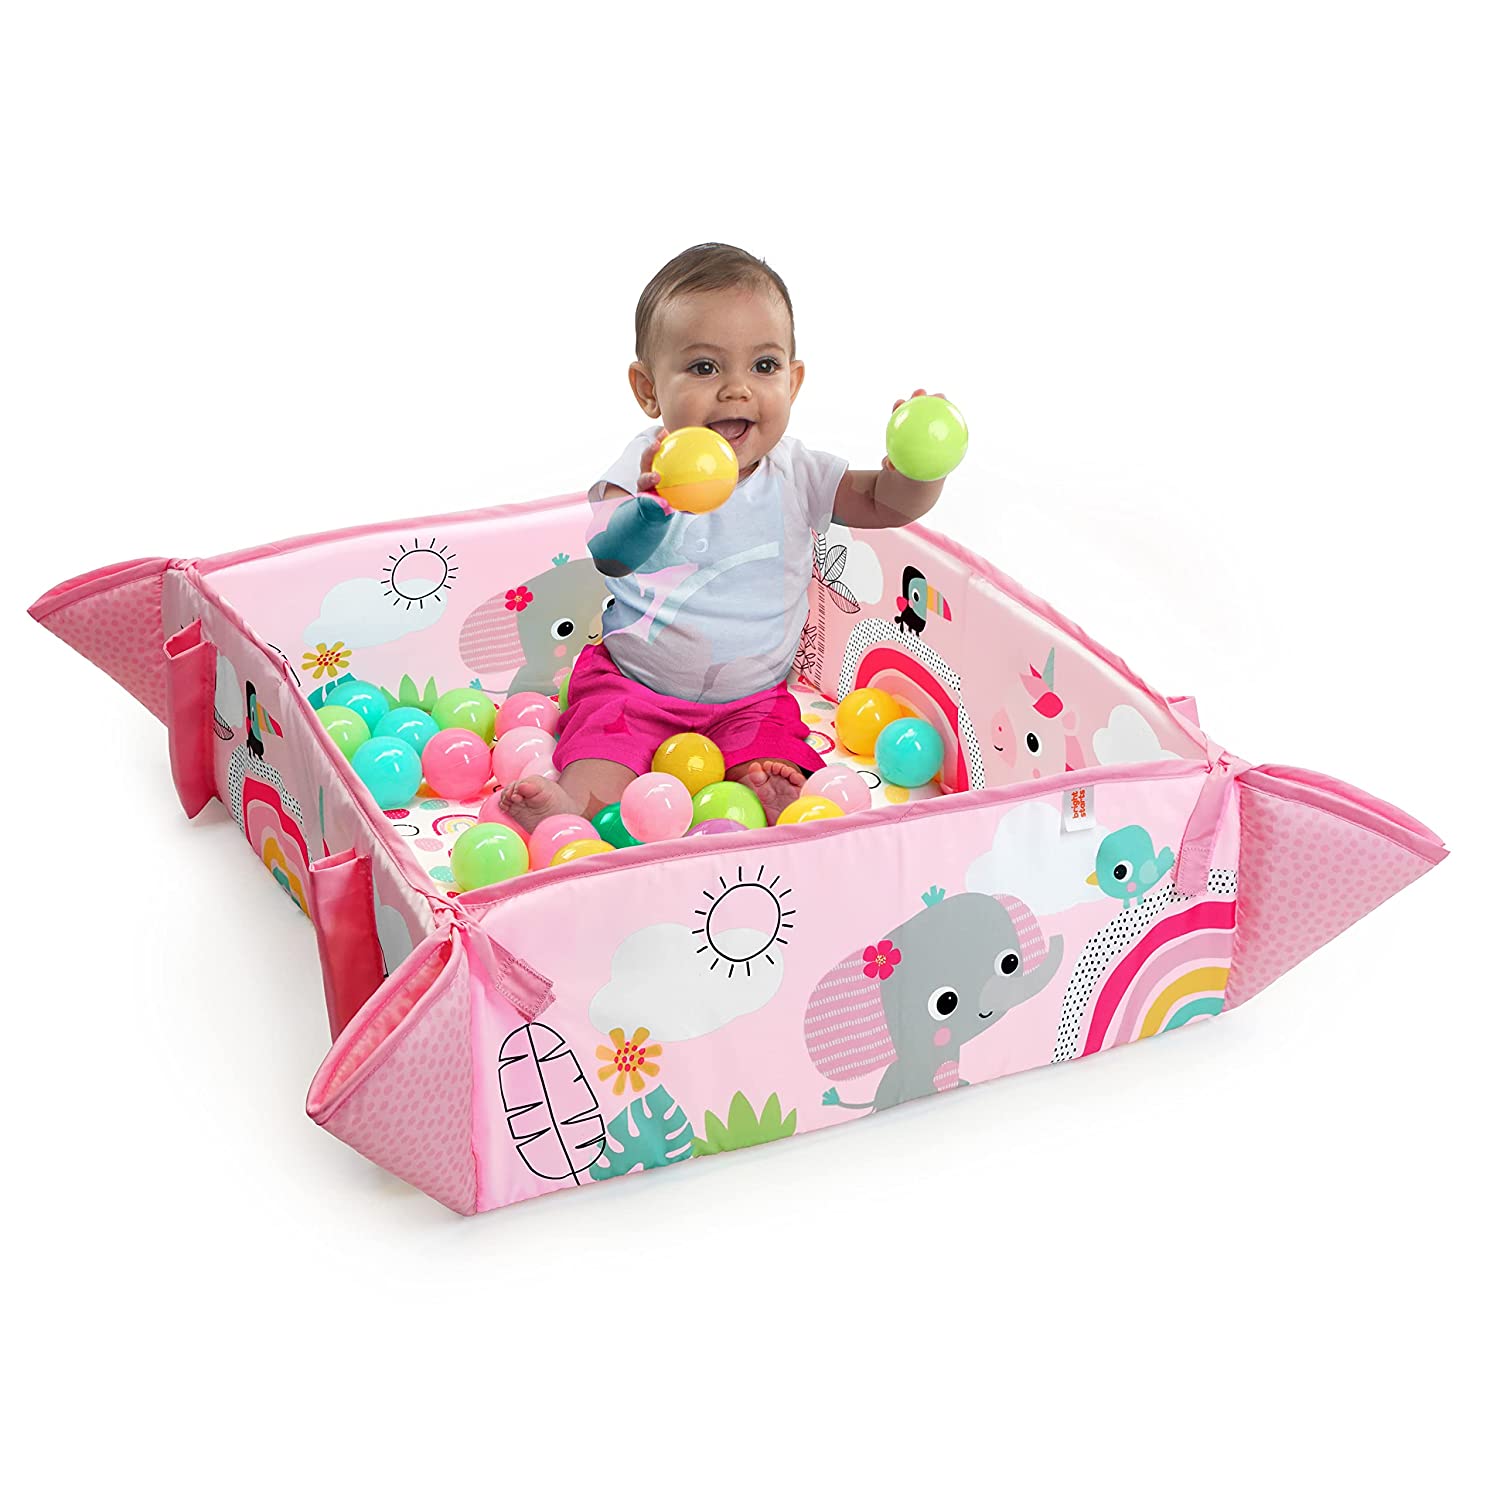 Bright Starts - 5-in-1 Activity Gym & Ball Pit.